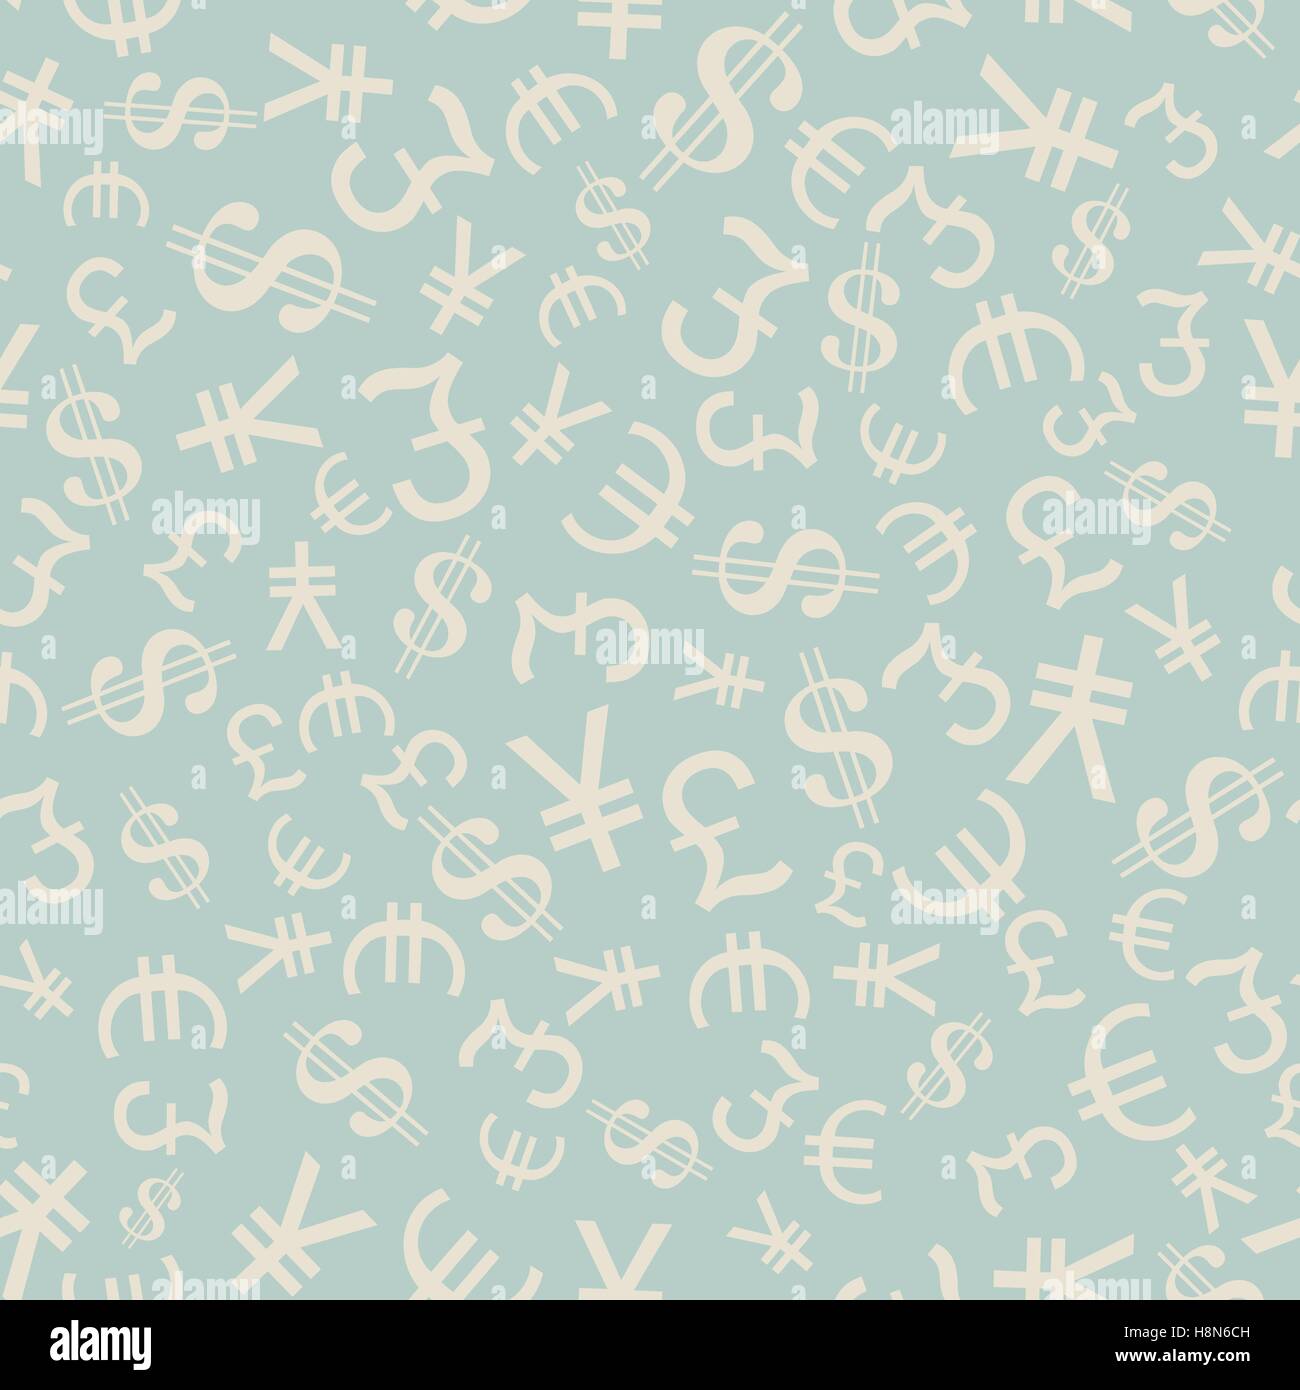 Currency Symbol Seamless pattern Stock Vector